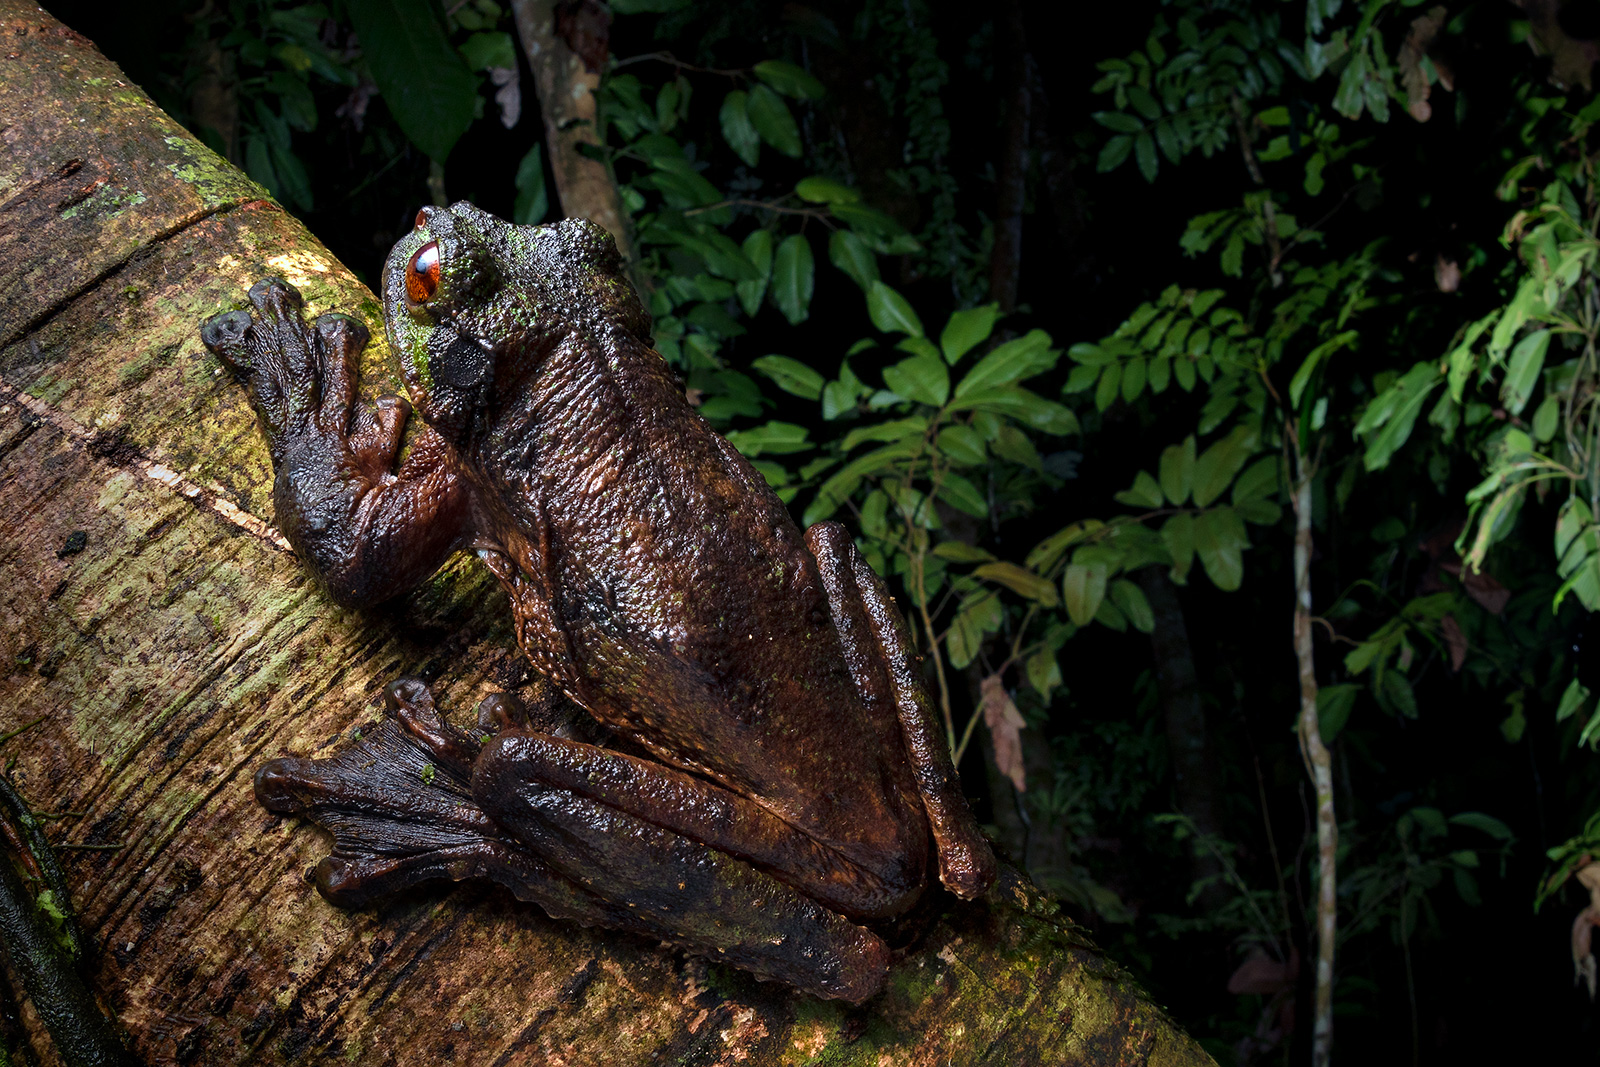 Image of a Phantasmal Fringe-limbed Frog hanging out in the canopy